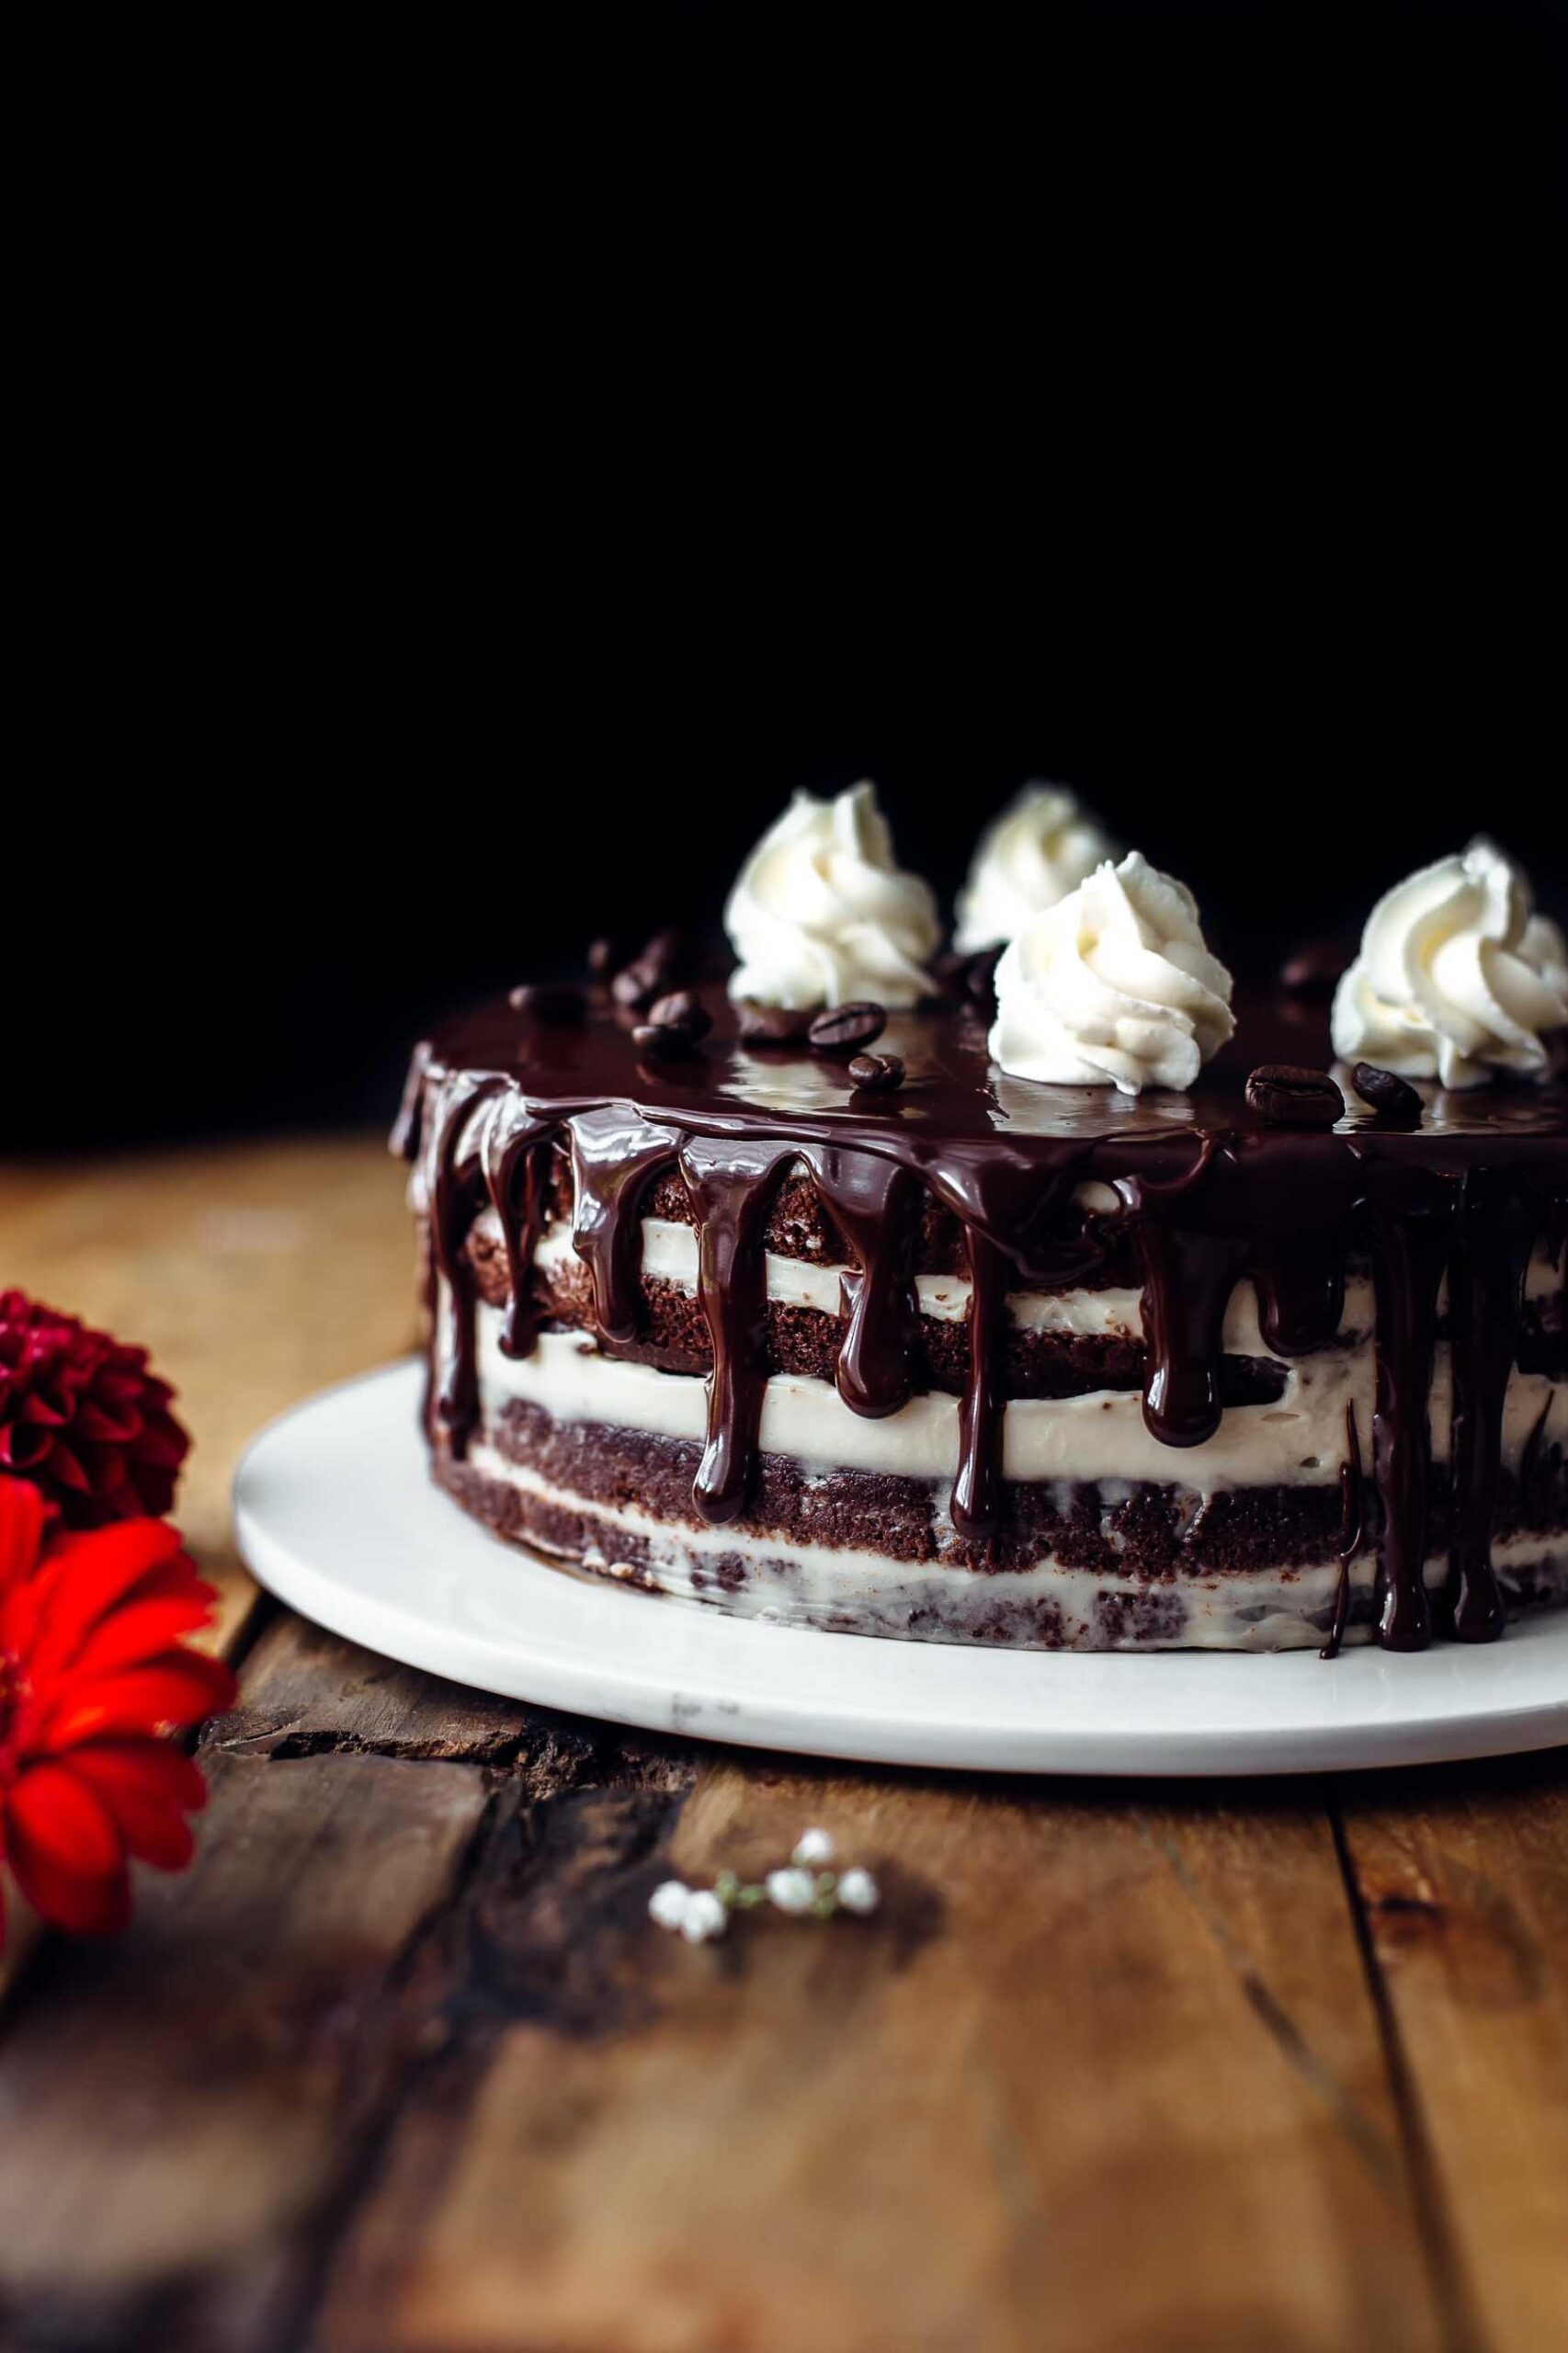  This gorgeous cake is as delicious as it is beautiful!